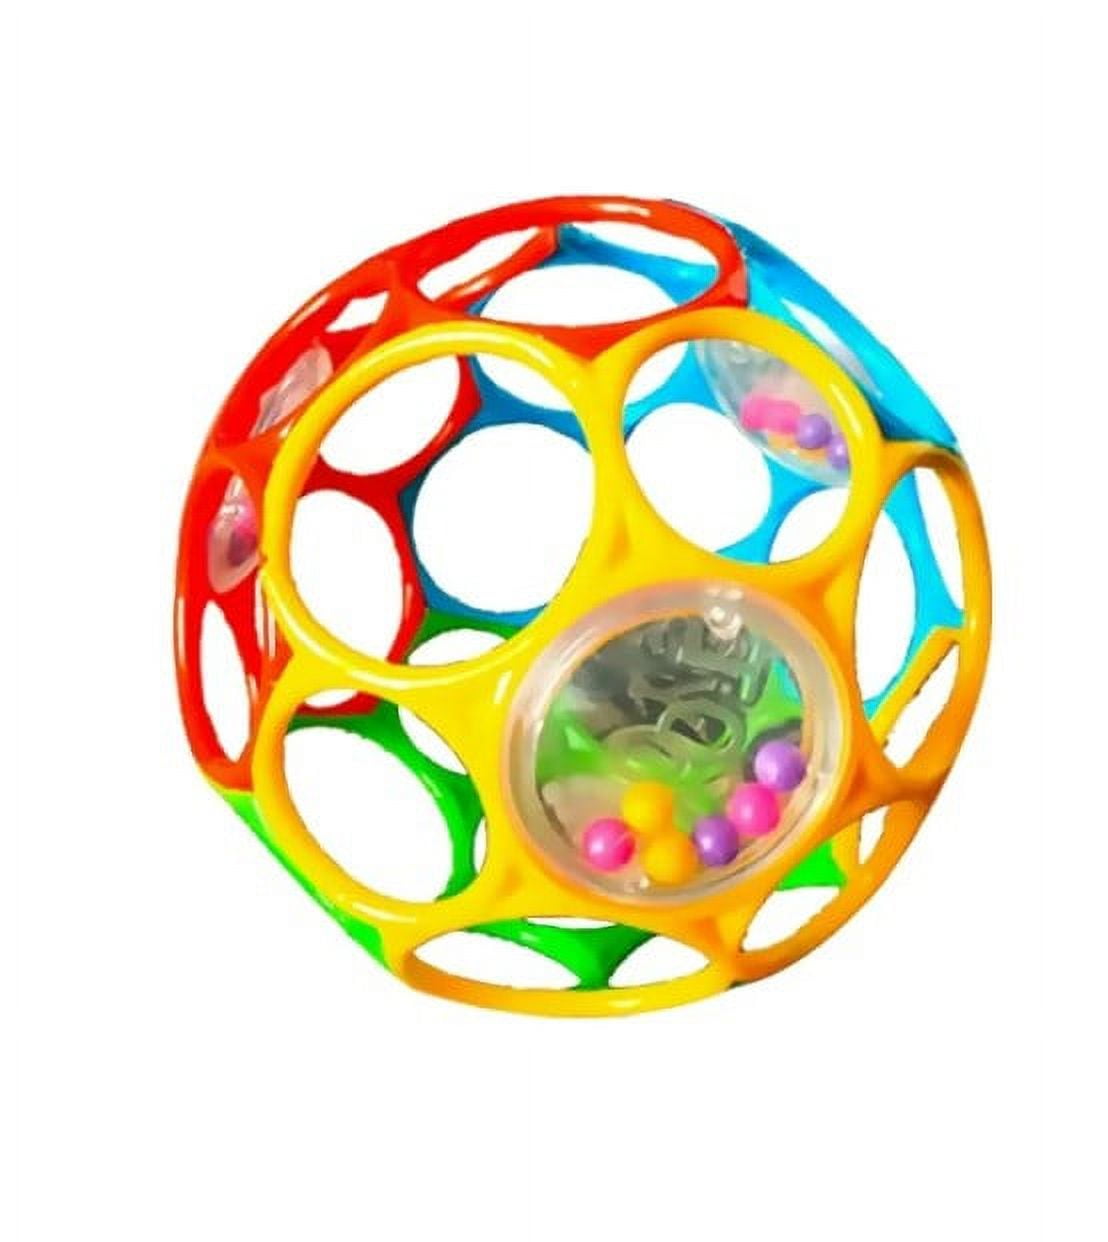 Voiture oball - HOPTOYS